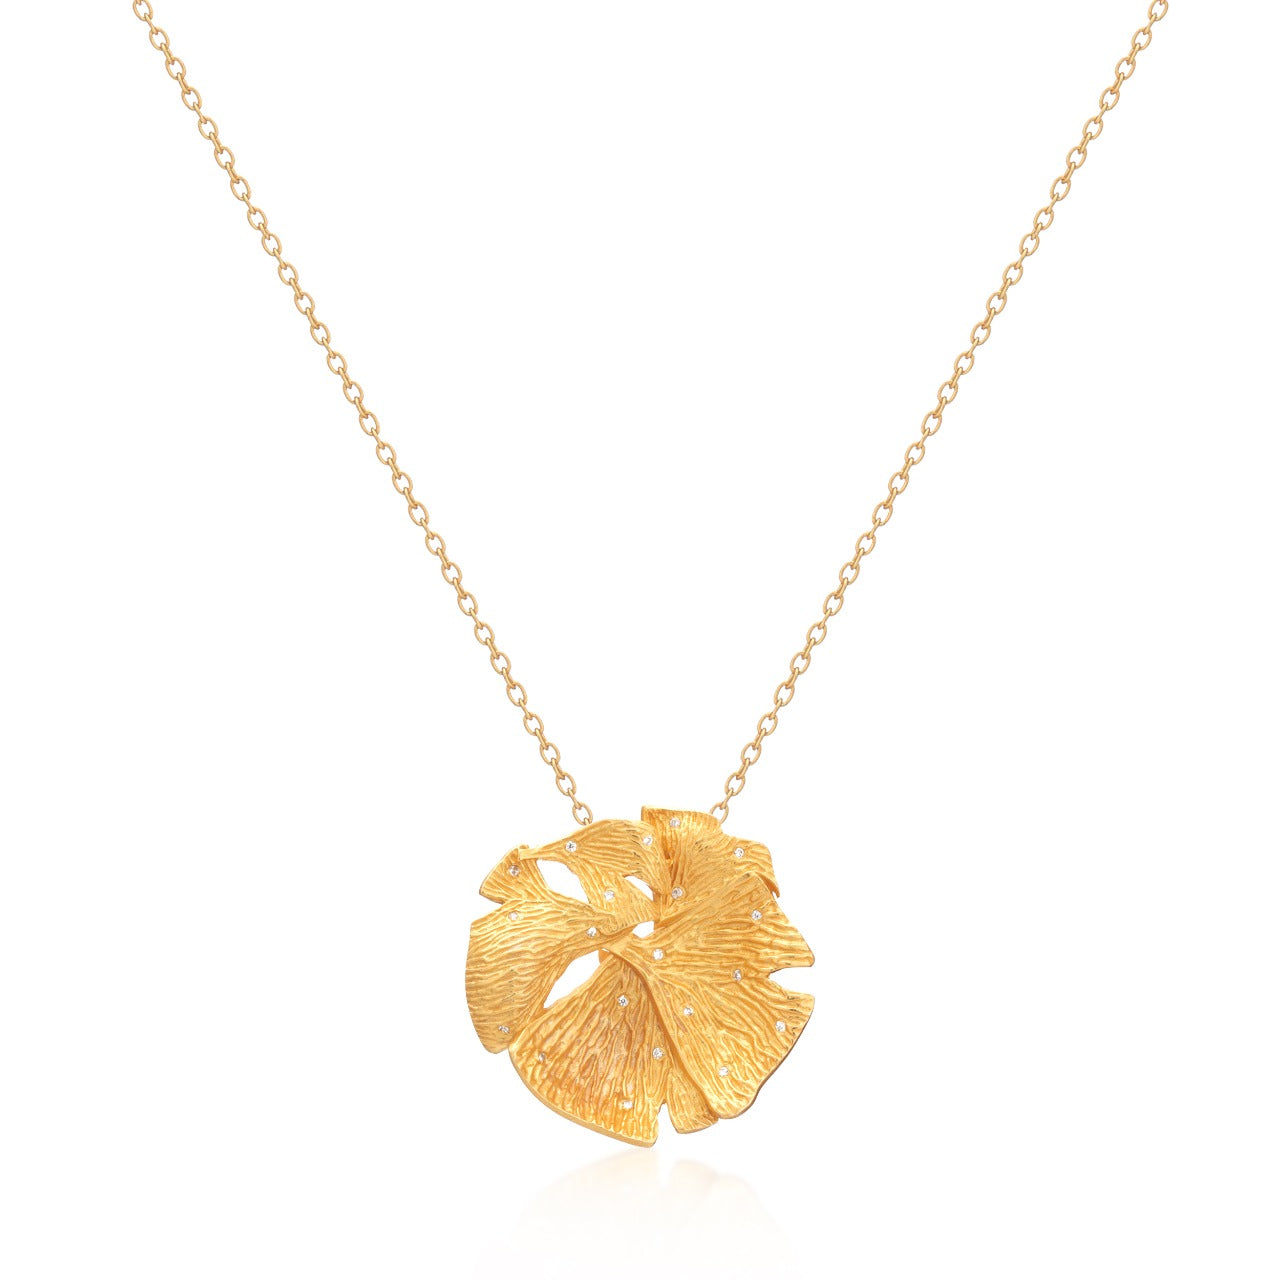 Evermore Ginkgo Leaf Necklace – Morning Moon Nature Jewelry